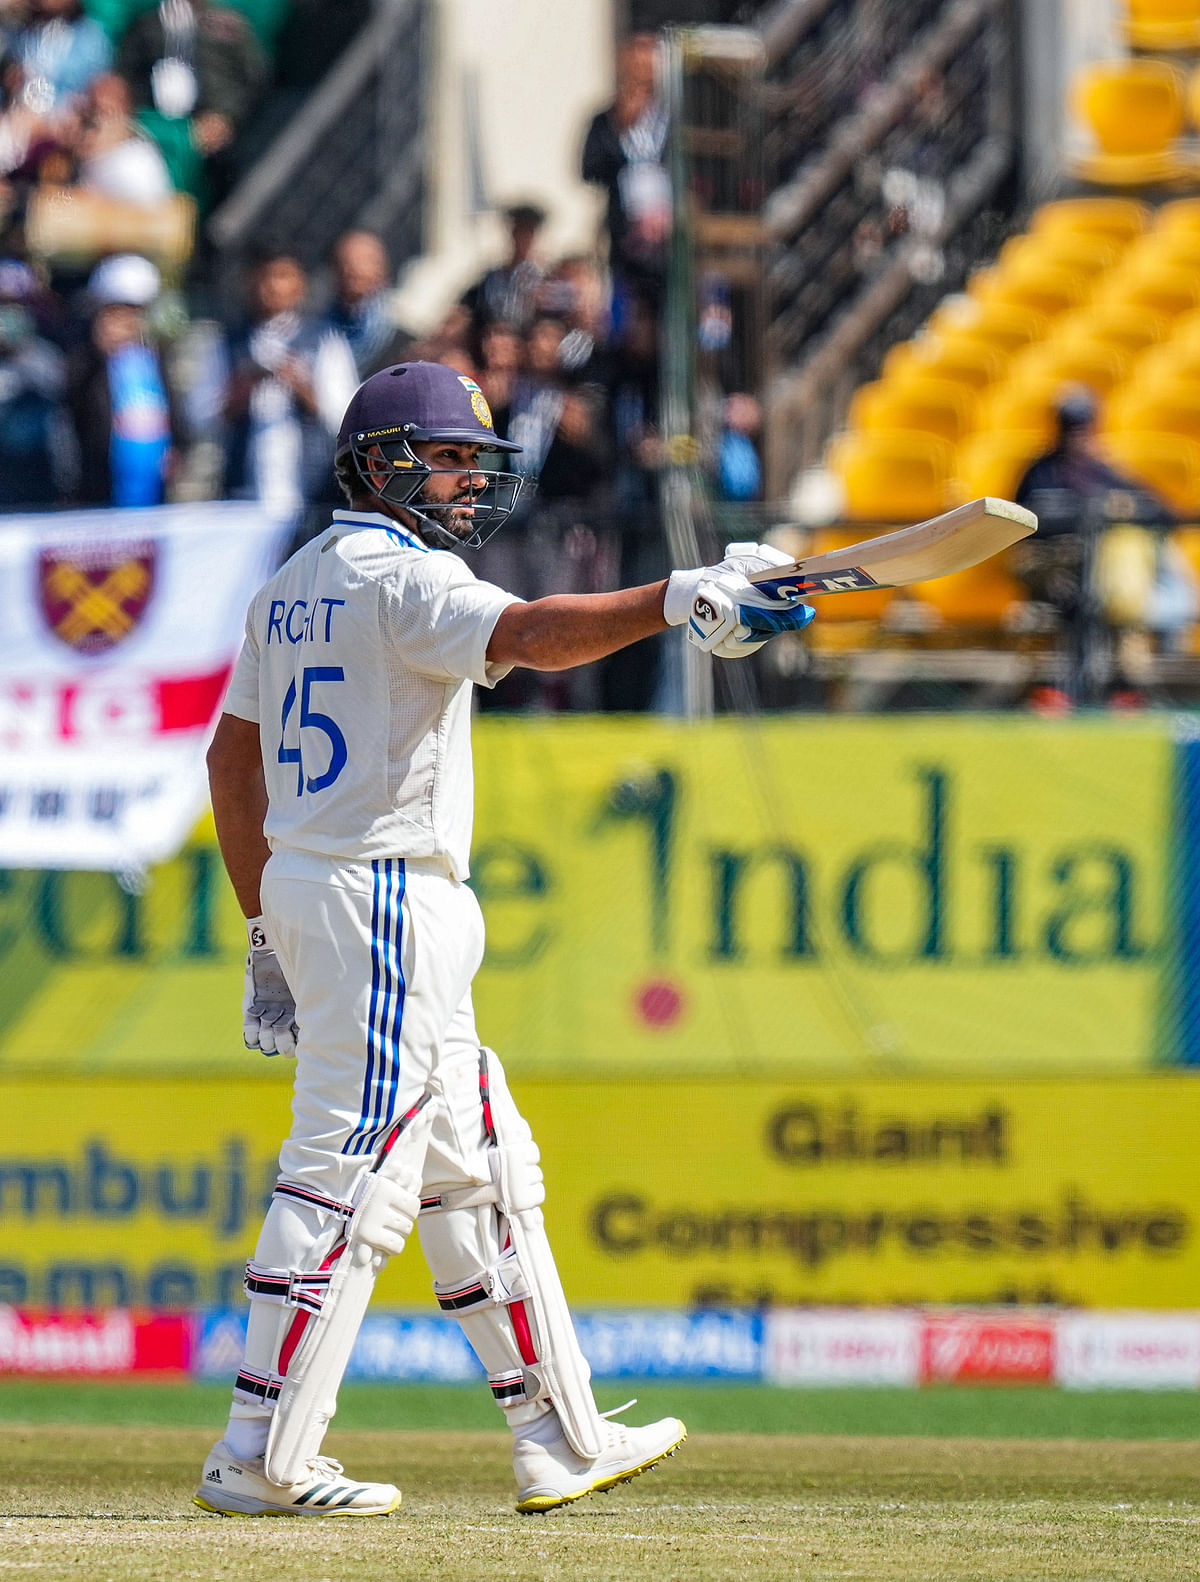 Riding on centuries by Rohit Sharma and Shubman Gill, India lead England by 255 runs on Day 2 of the fifth Test.